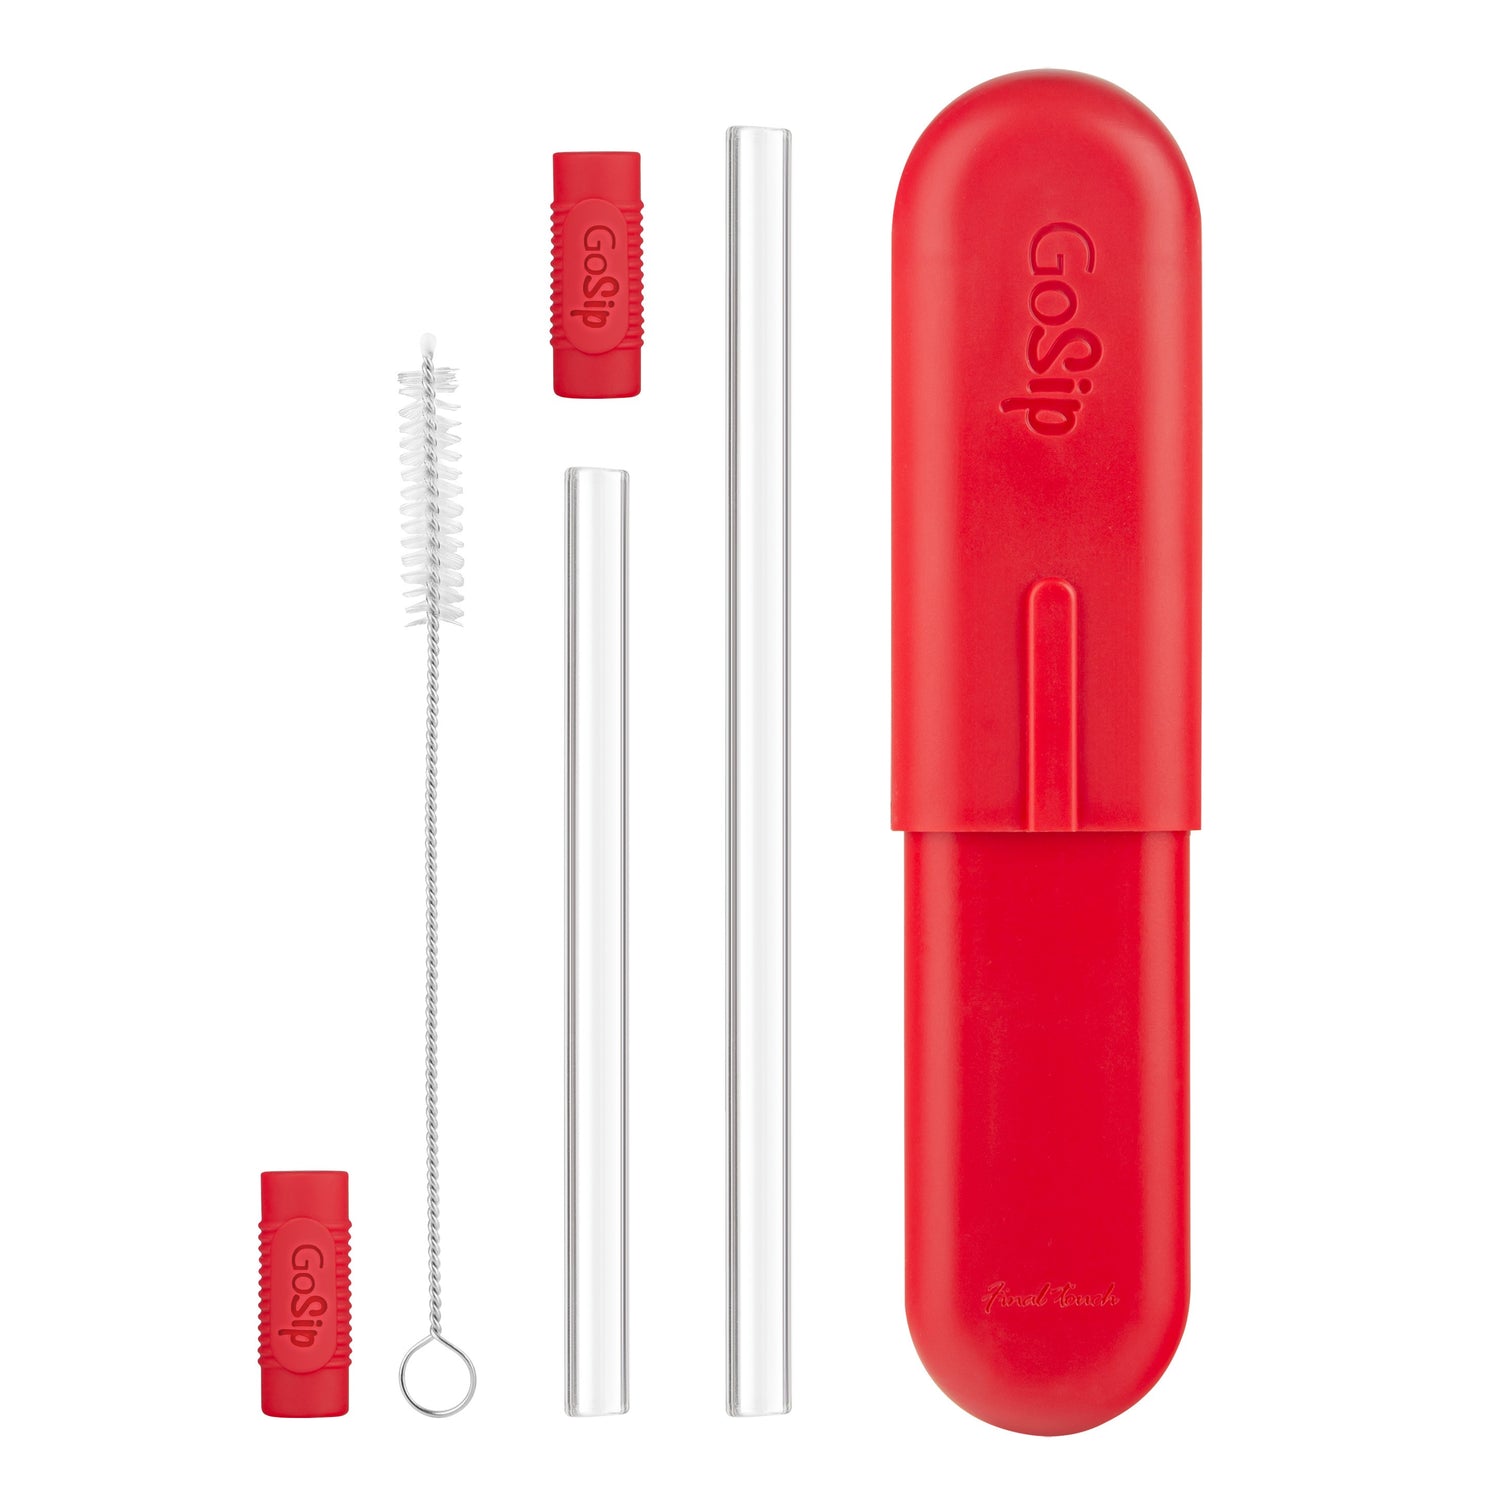 GoSip Glass Reusable Straws - Candy Red